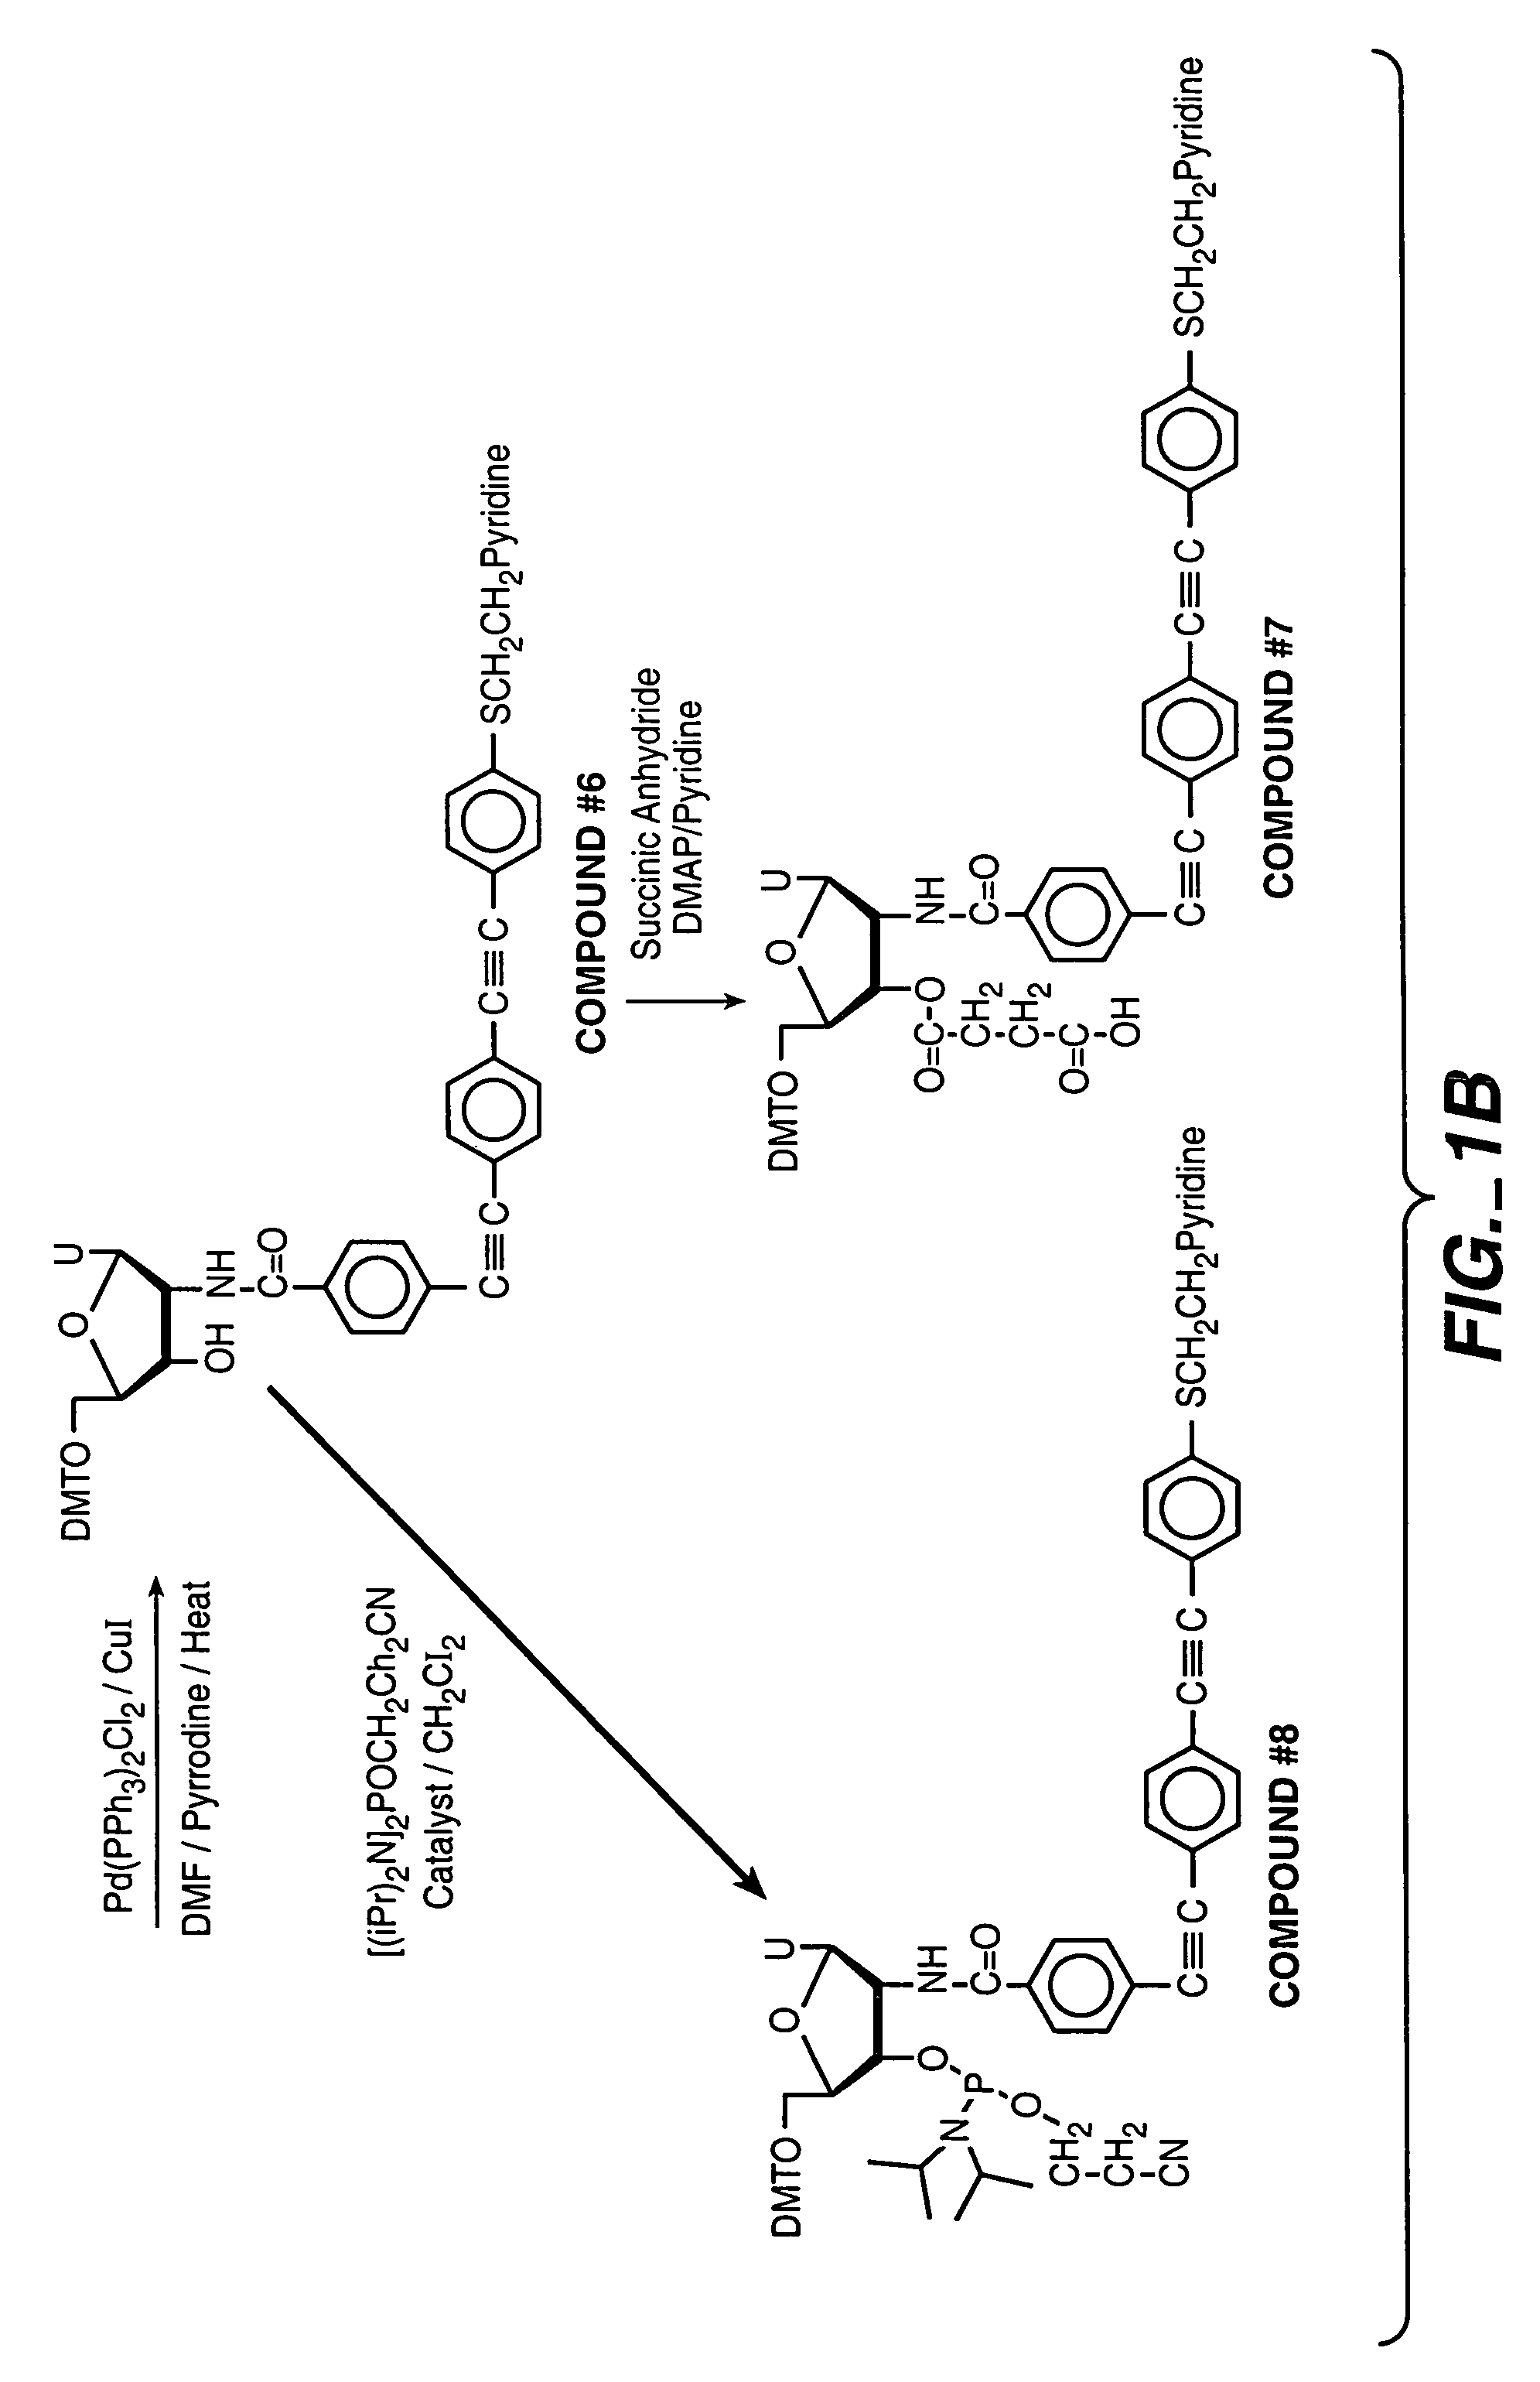 Electronic transfer moieties attached to peptide nucleic acids